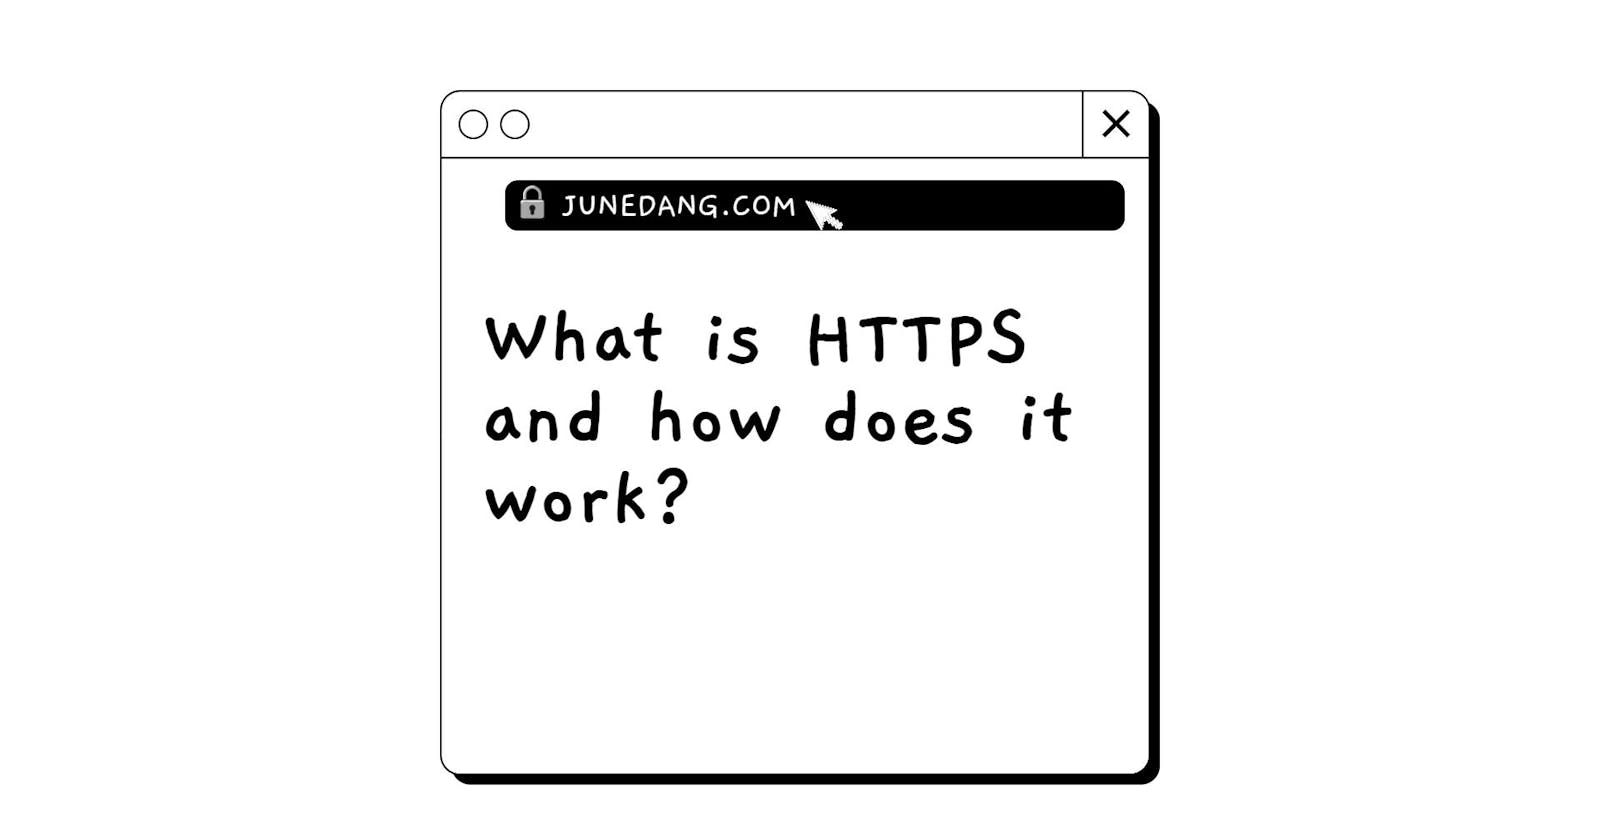 What is HTTPS and how does it work?